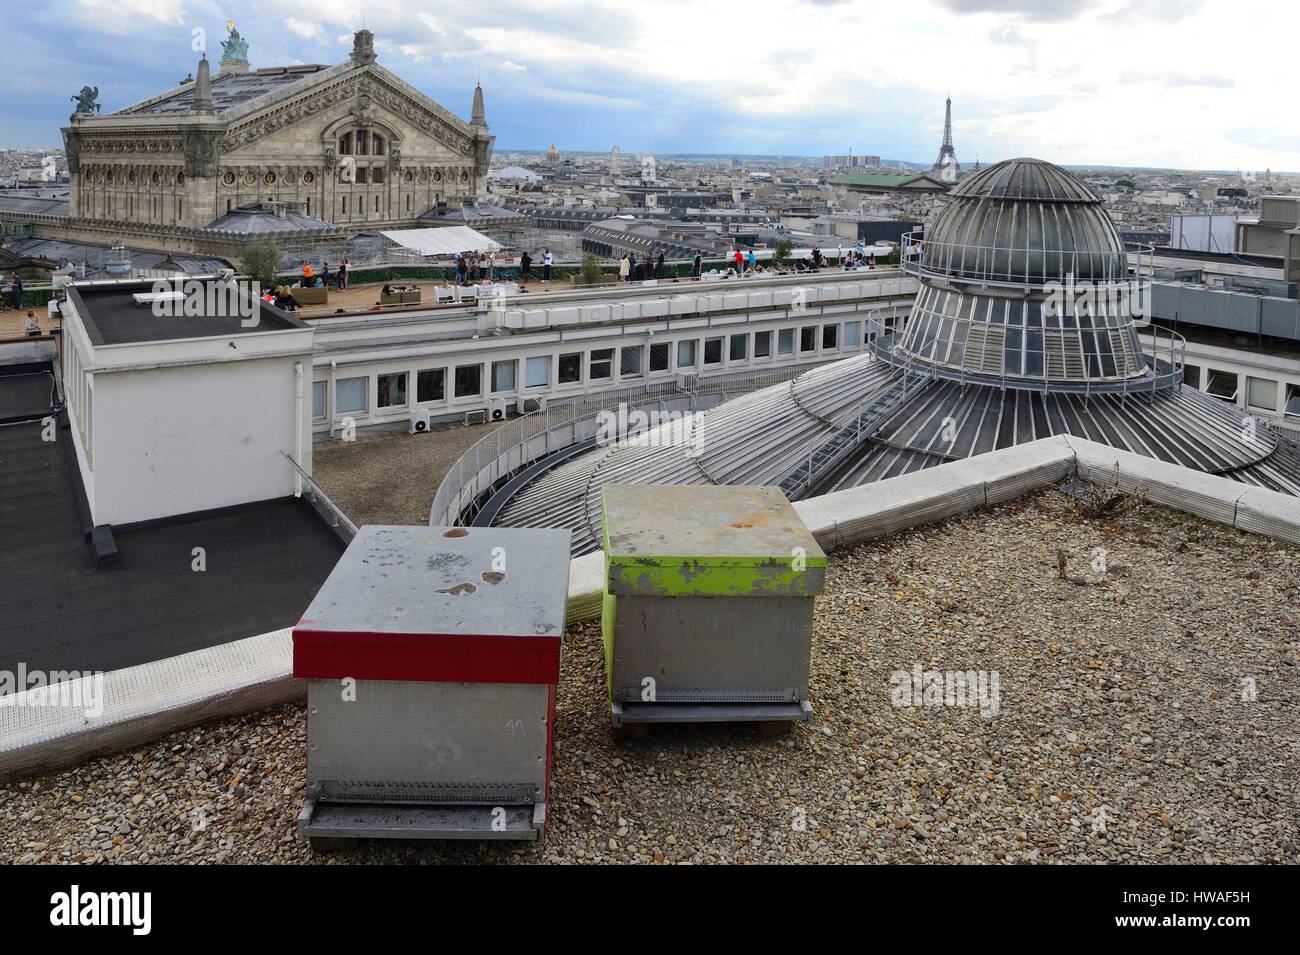 File:Dome of Les Invalides @ Rooftop terrace @ Galeries Lafayette